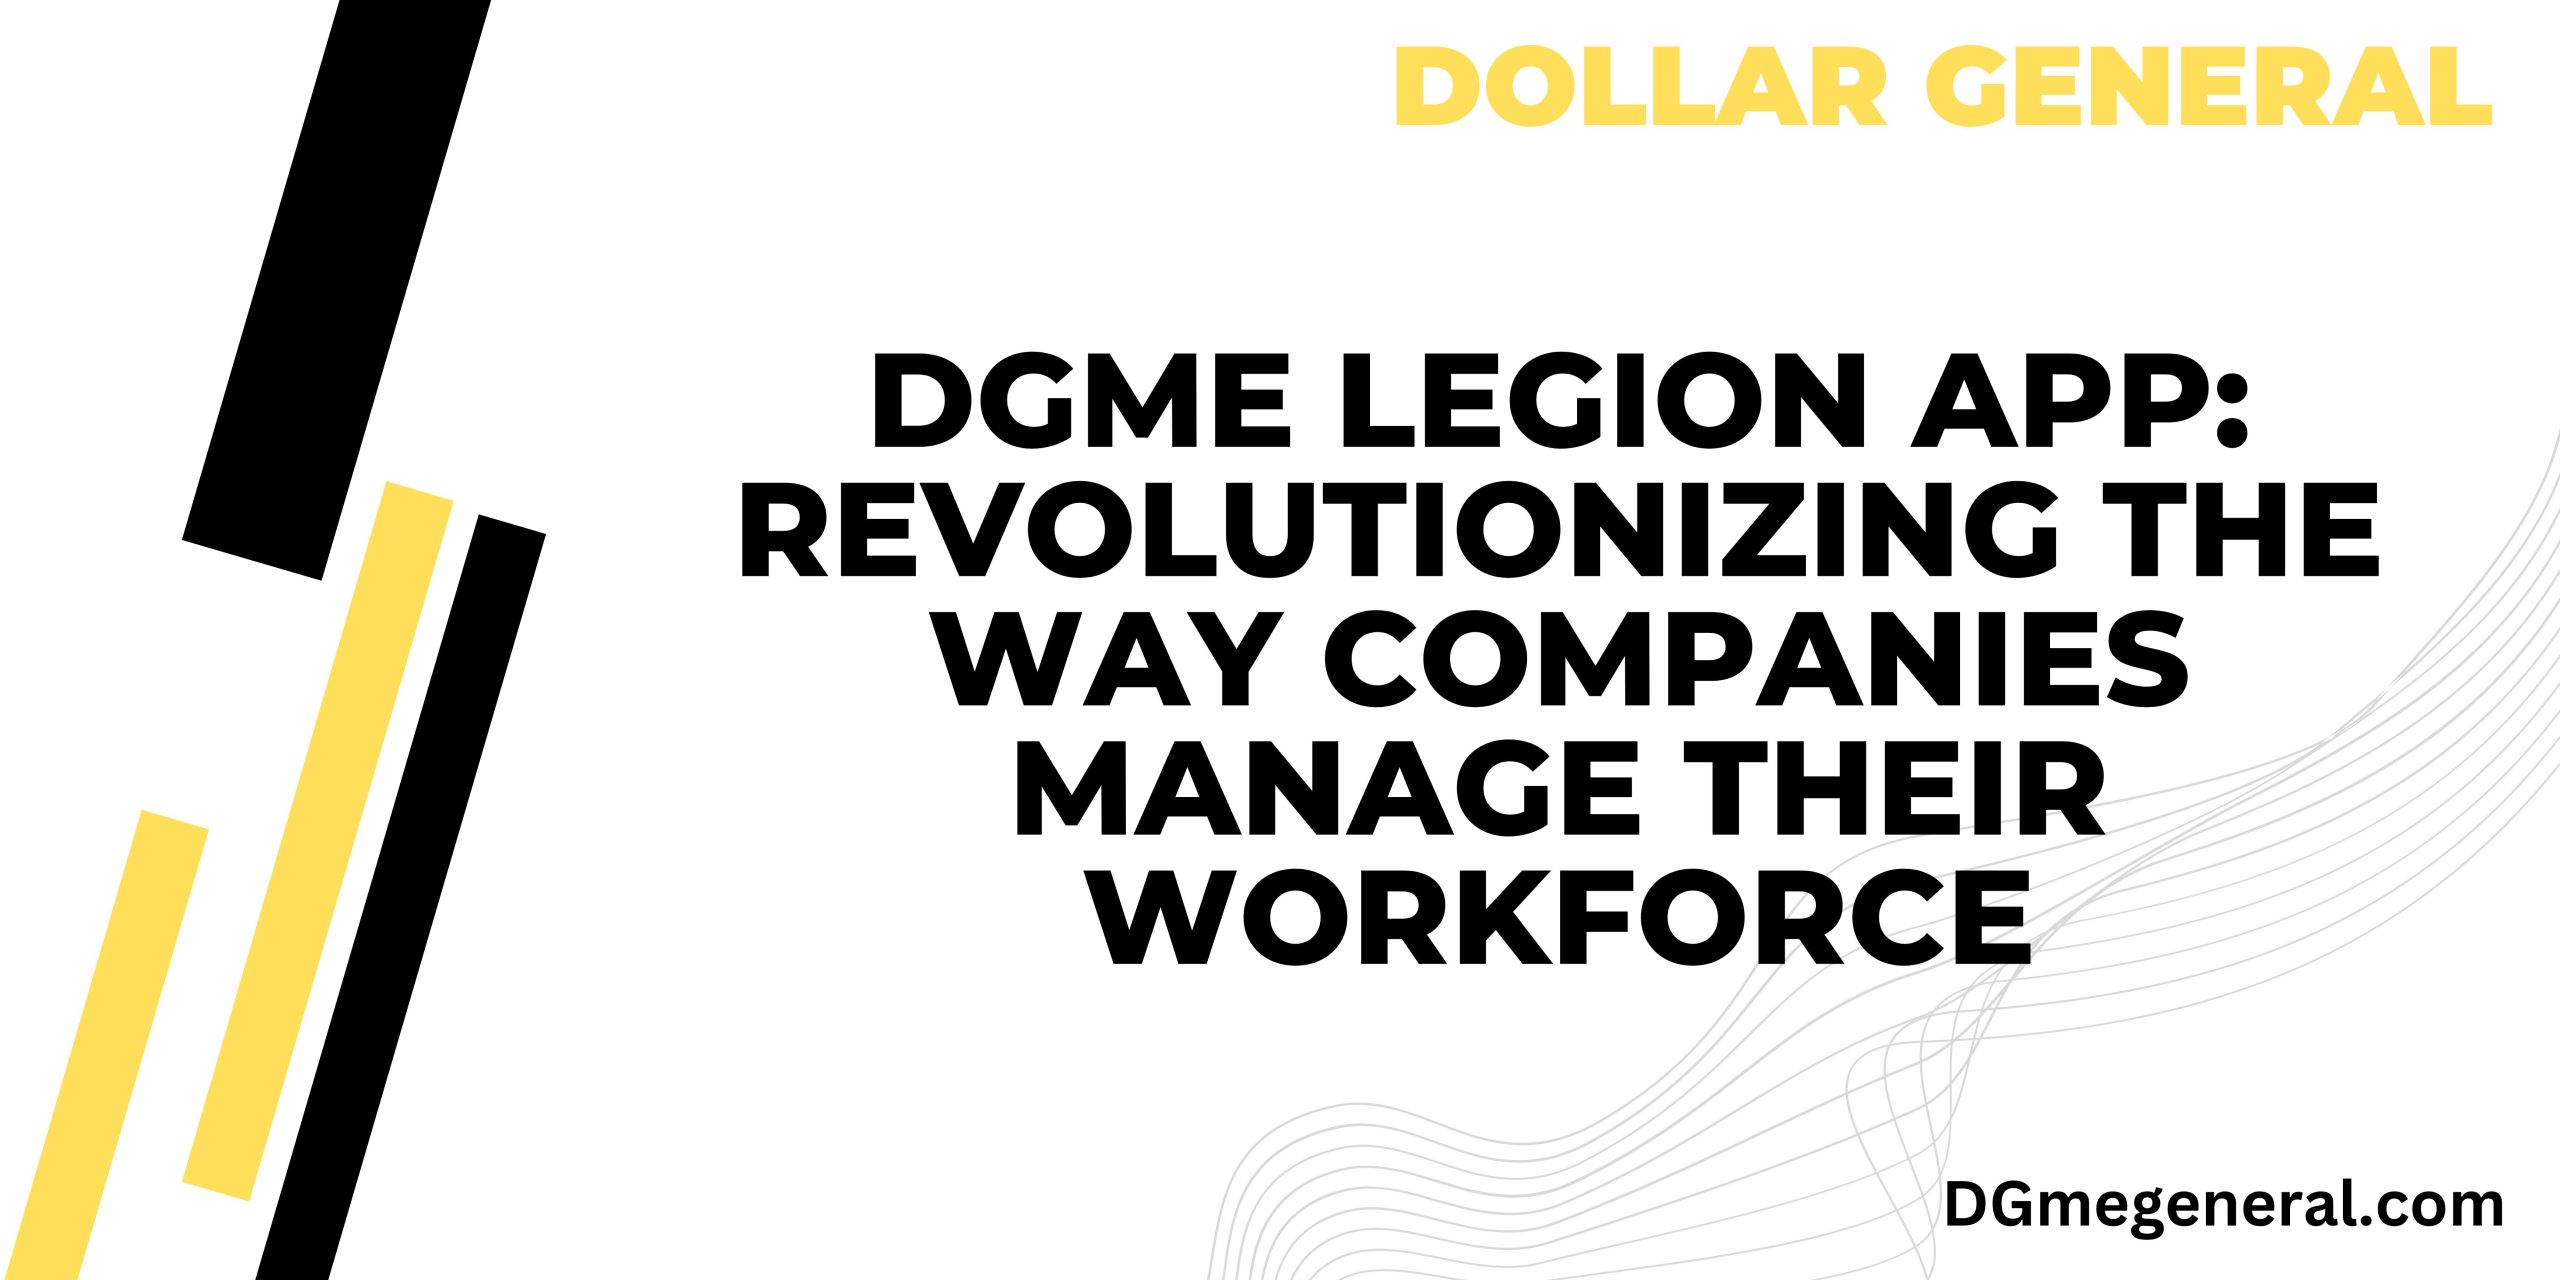 DGme Legion App Revolutionizing the Way Companies Manage Their Workforce